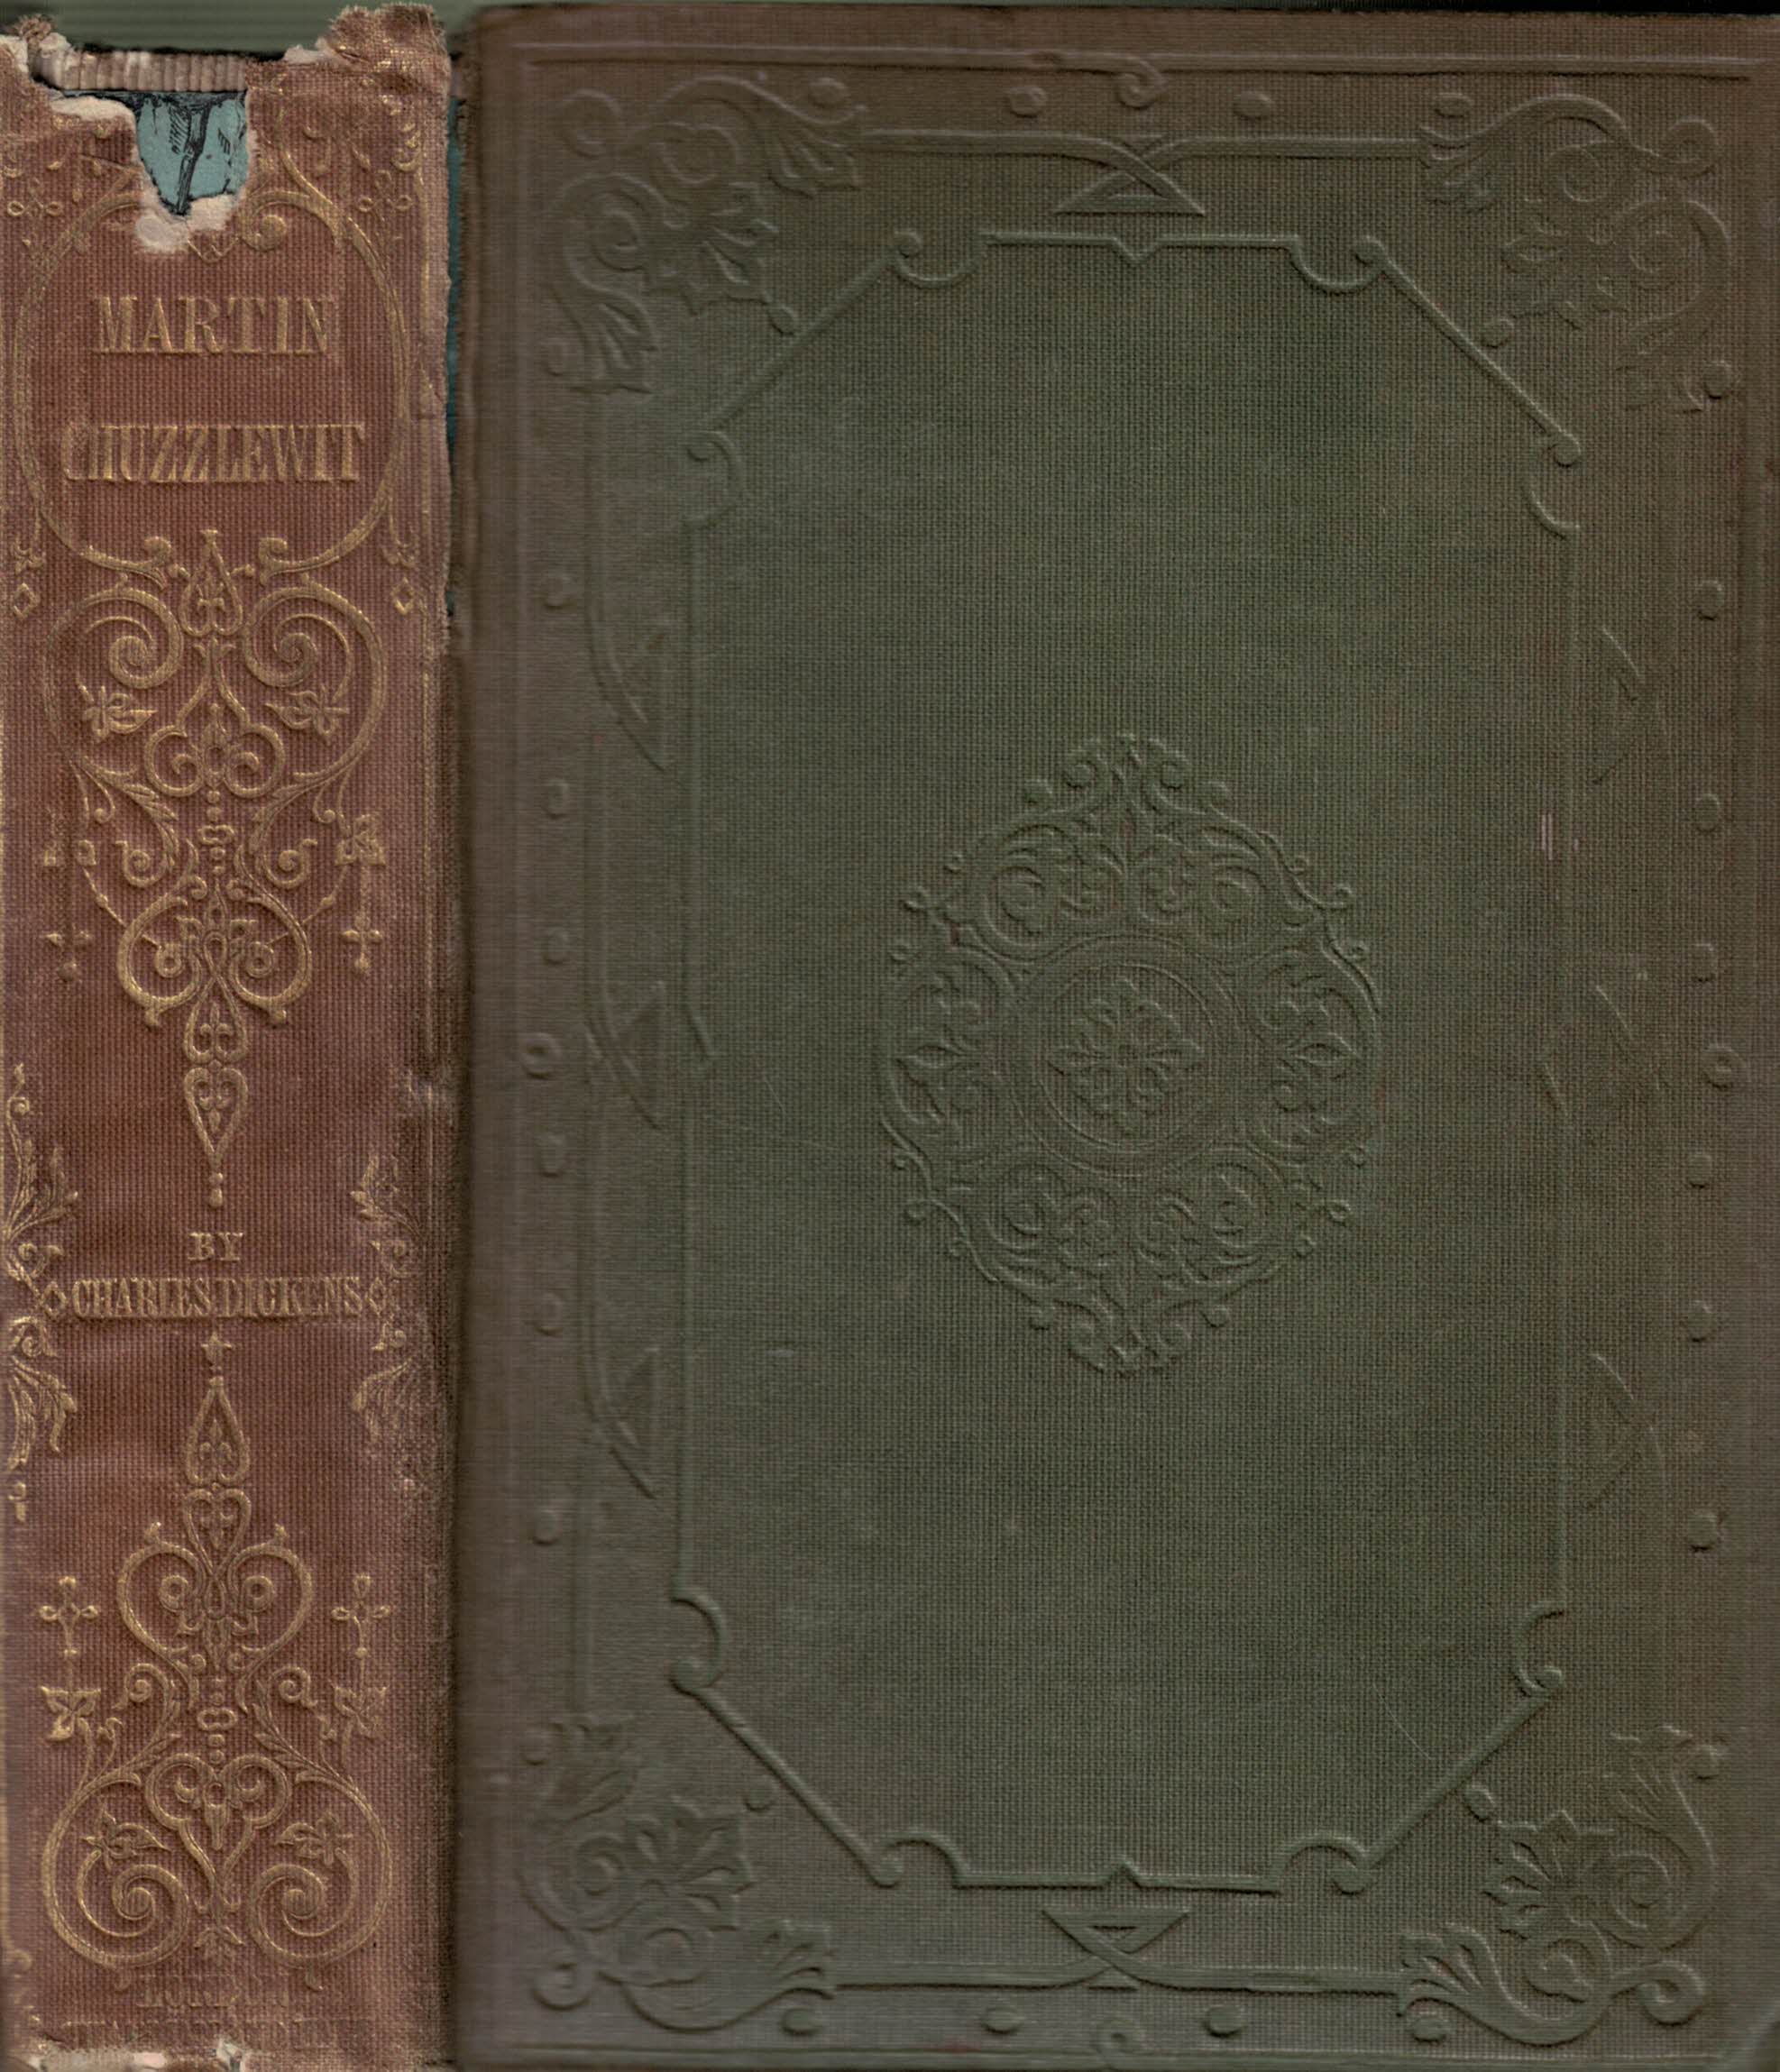 The Life and Adventures of Martin Chuzzlewit. Chapman edition. 1855.